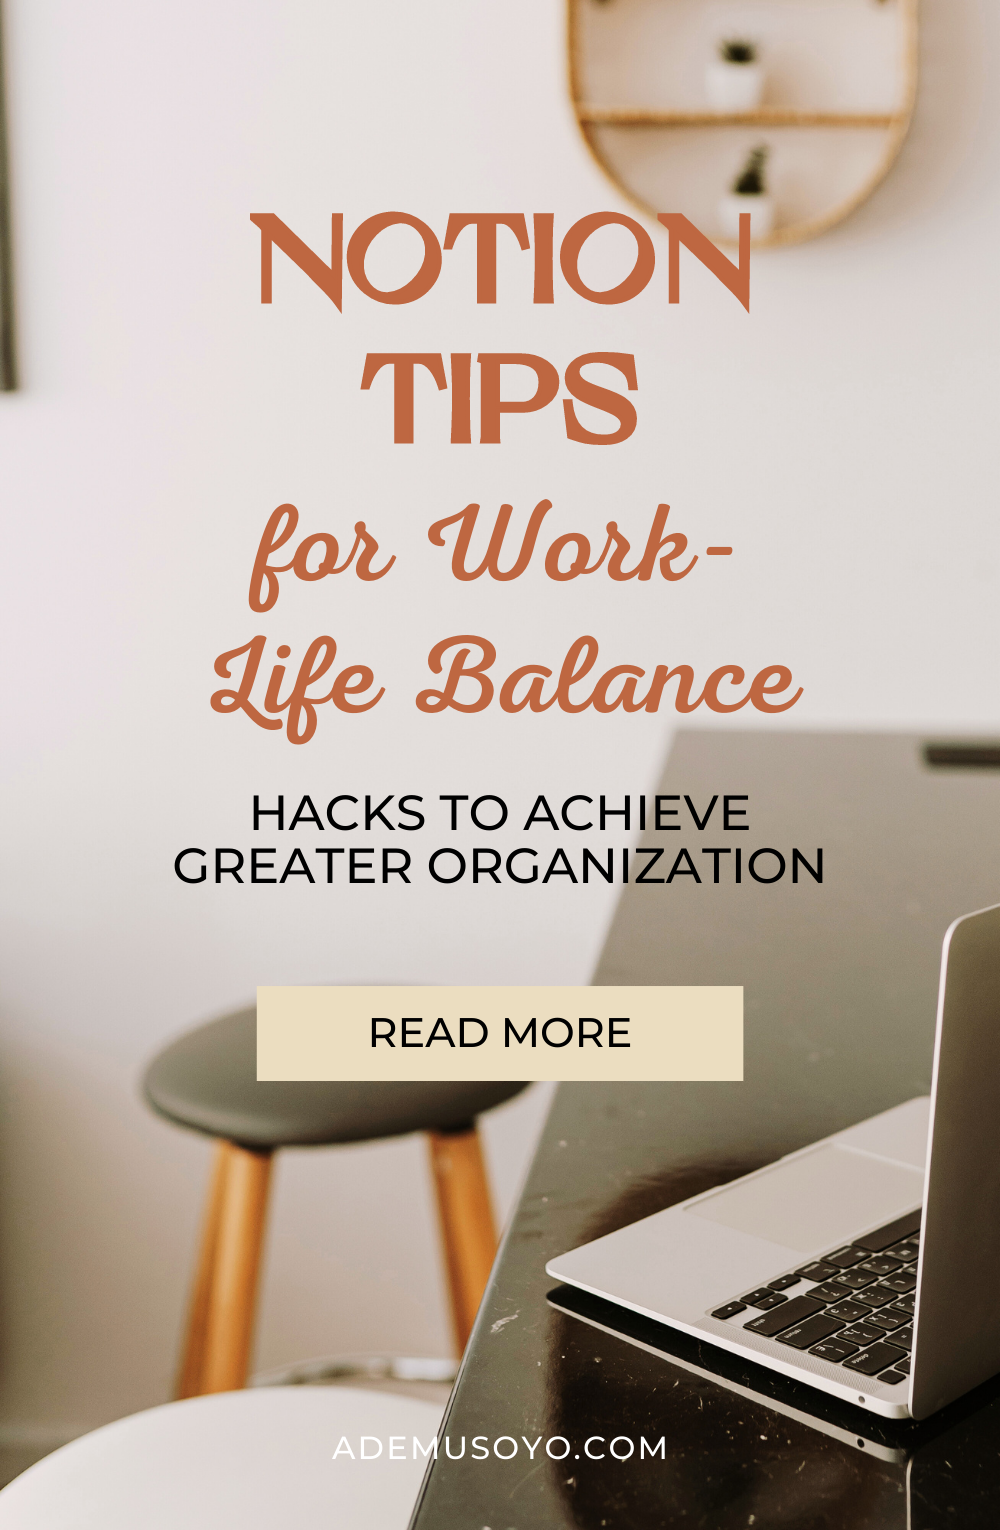 Discover game-changing Notion tips and hacks to optimize your work-life balance. Explore innovative ways to use Notion for time management, task organization, and maintaining a healthy lifestyle. Work smarter, not harder, with Notion whether you're working from home or remotely. Read more Notion expert tips at ademusoyo.com.